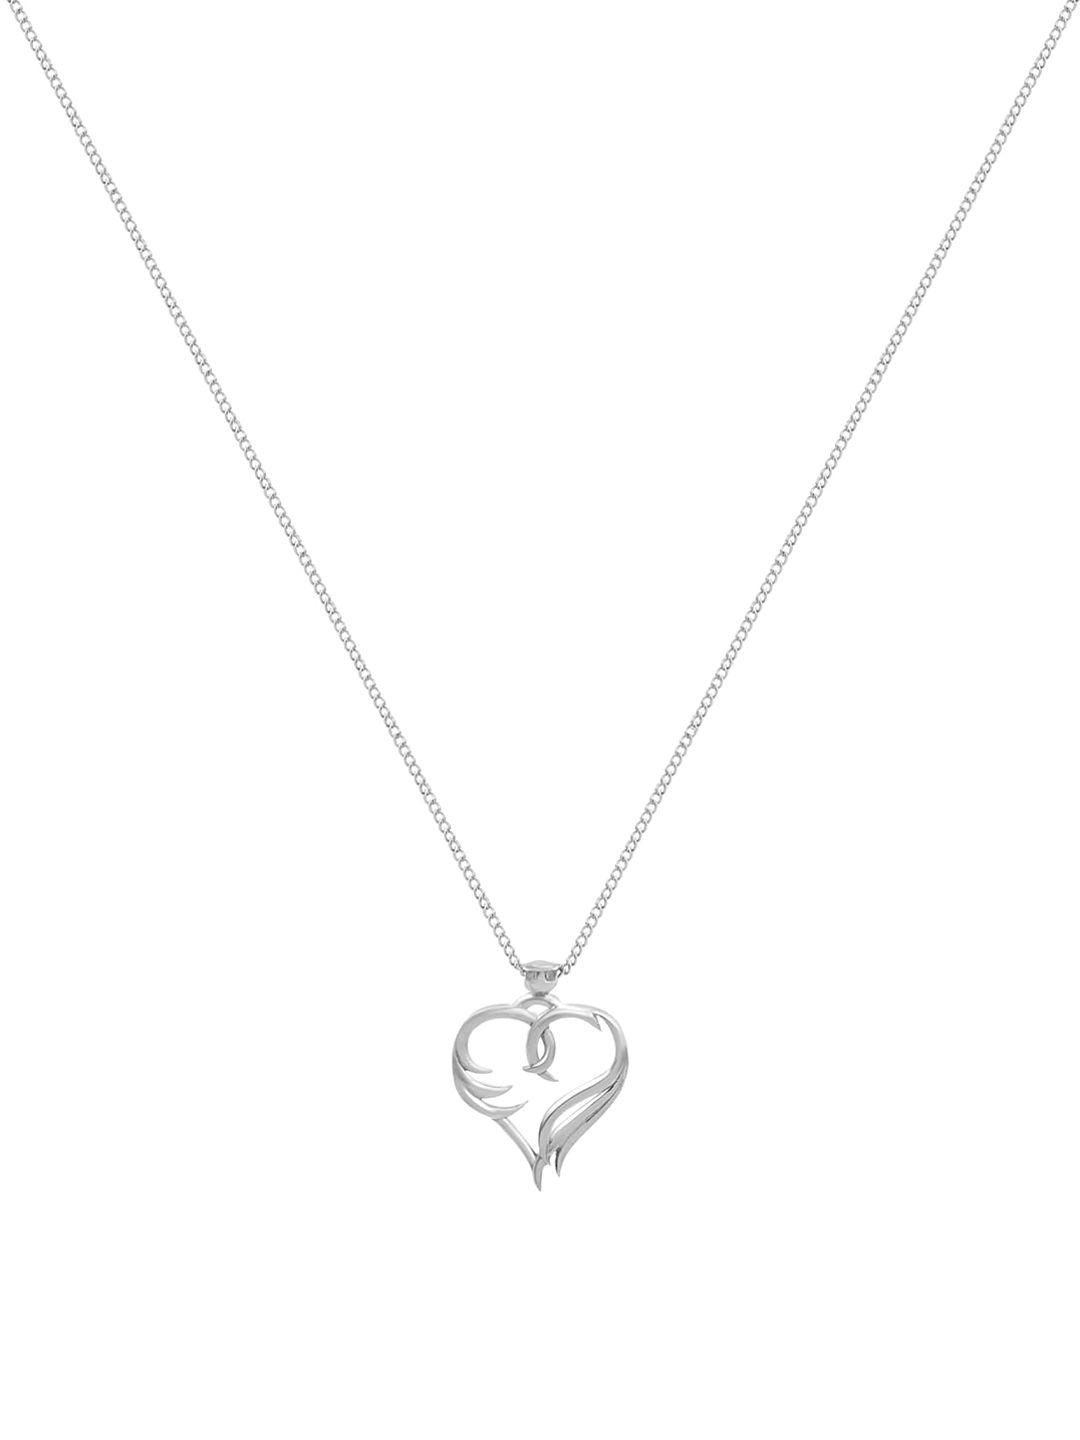 kicky-and-perky-92.5-sterling-silver-double-swan-heart-pendant-with-chain